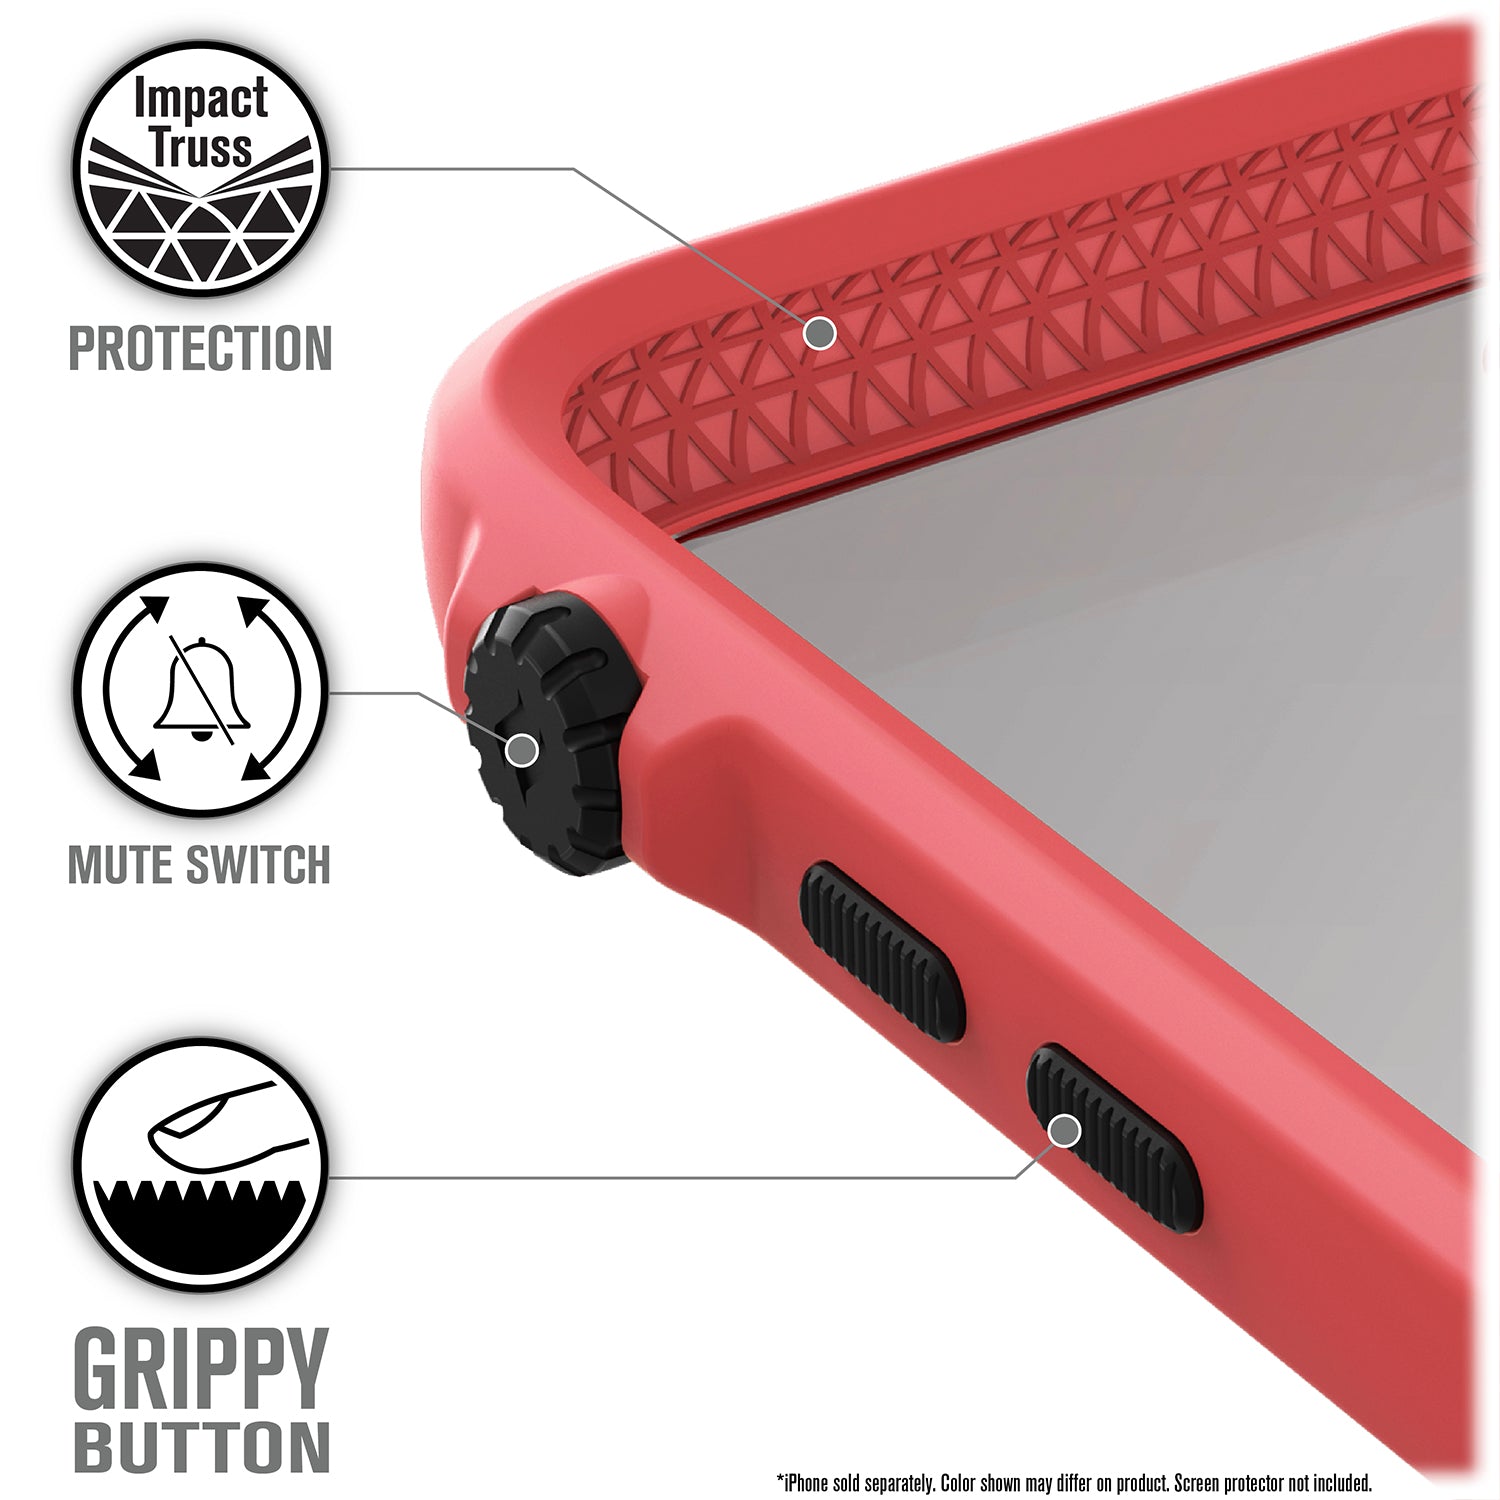 Catalyst iphone 8/7 impact protection case showing the case's geometrical design in a coral colorway text reads impact truss protection mute switch grippy button